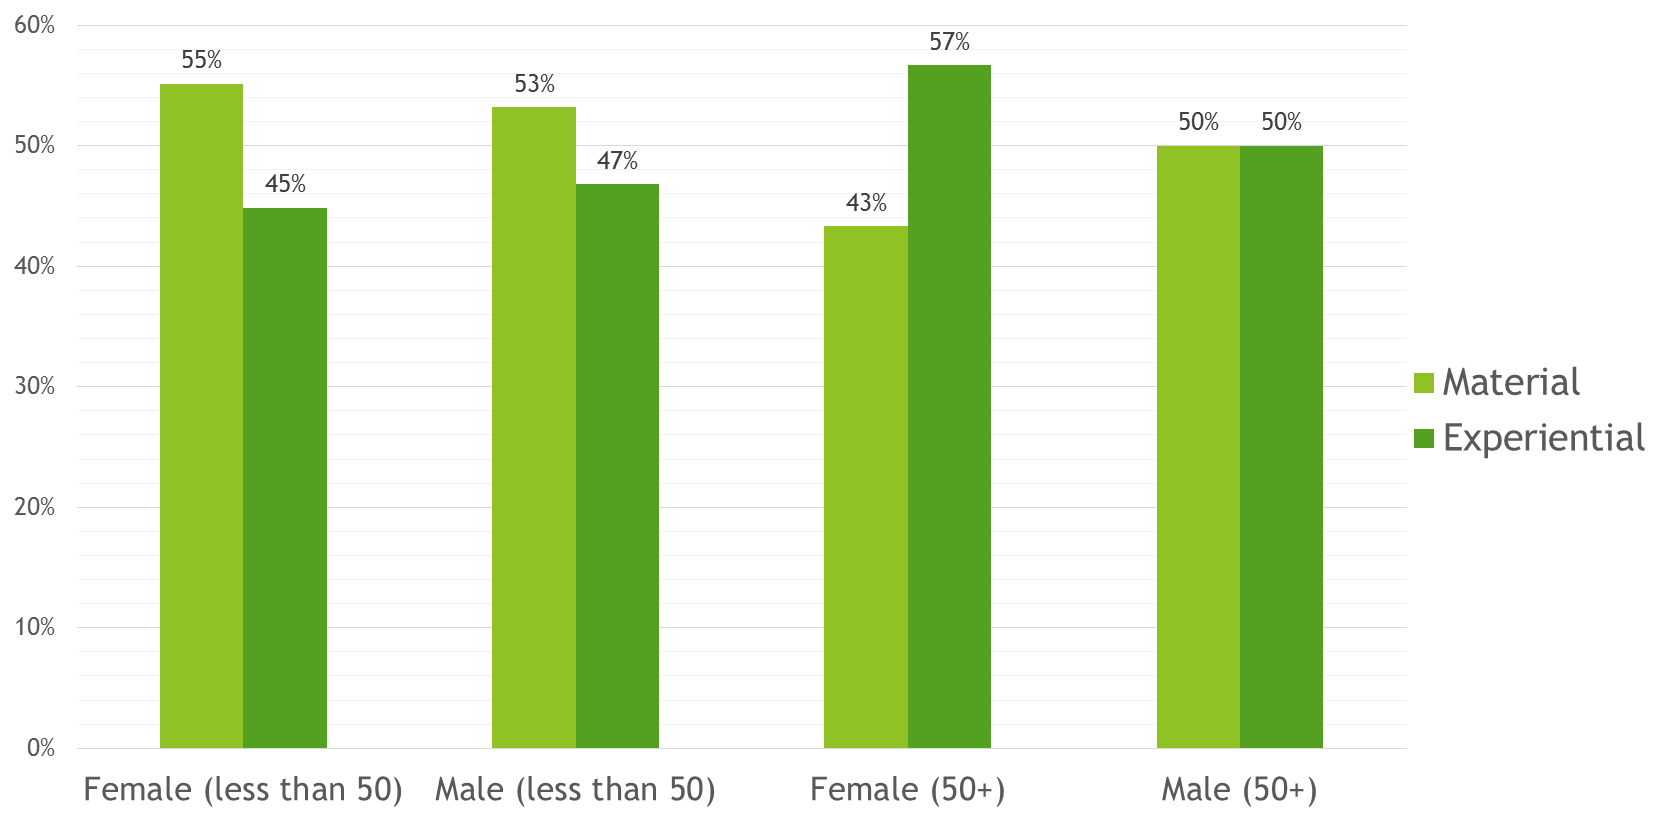 Division of survey results by age groups